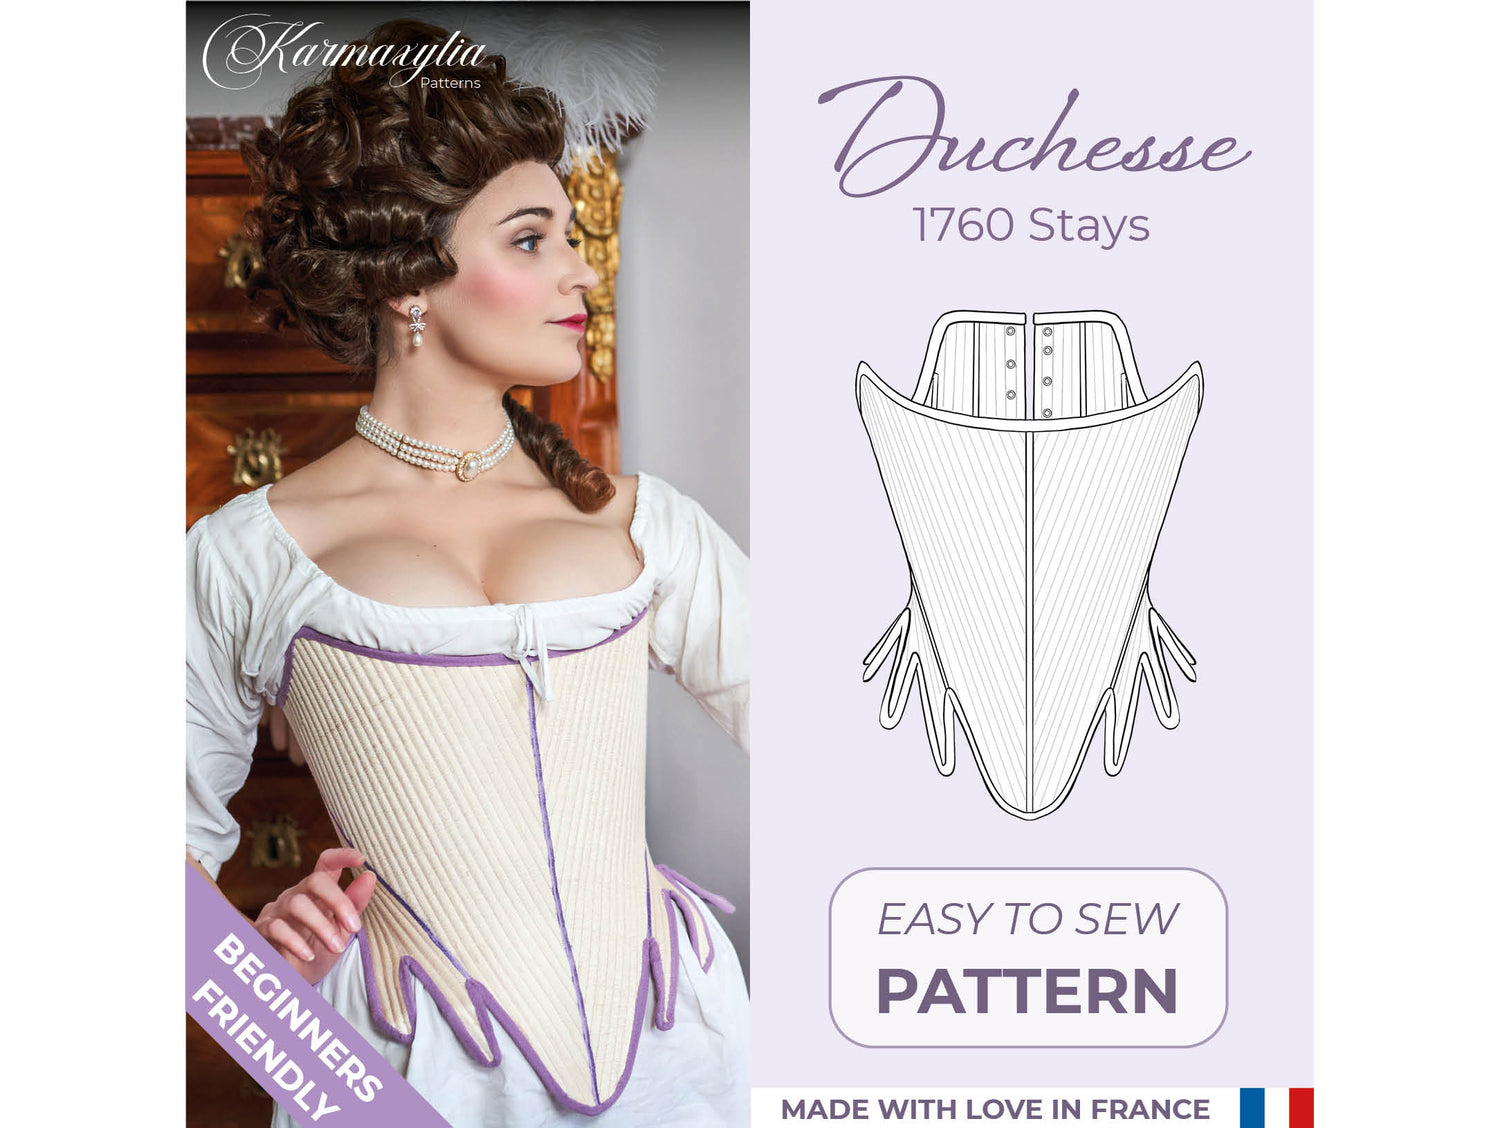 Sewing patterns - corsets, stays and outfits